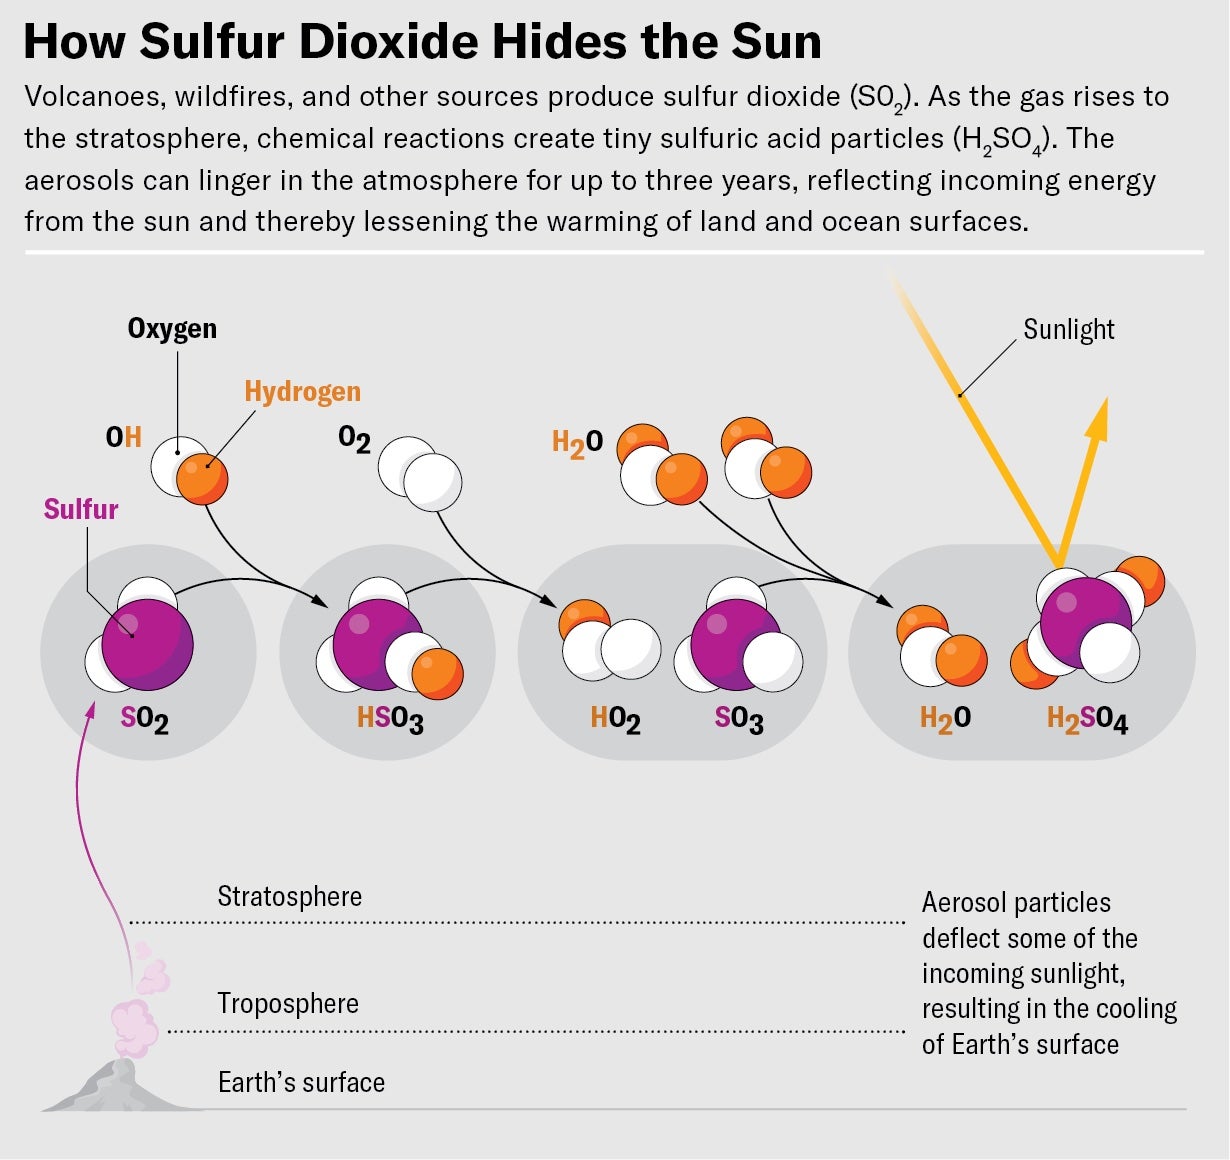 Graphic shows the chemical reactions that cause sulfur dioxide to change into sulfuric acid particles in the stratosphere. Those resulting aerosol particles can linger in the atmosphere, reflecting incoming energy from the sun. 